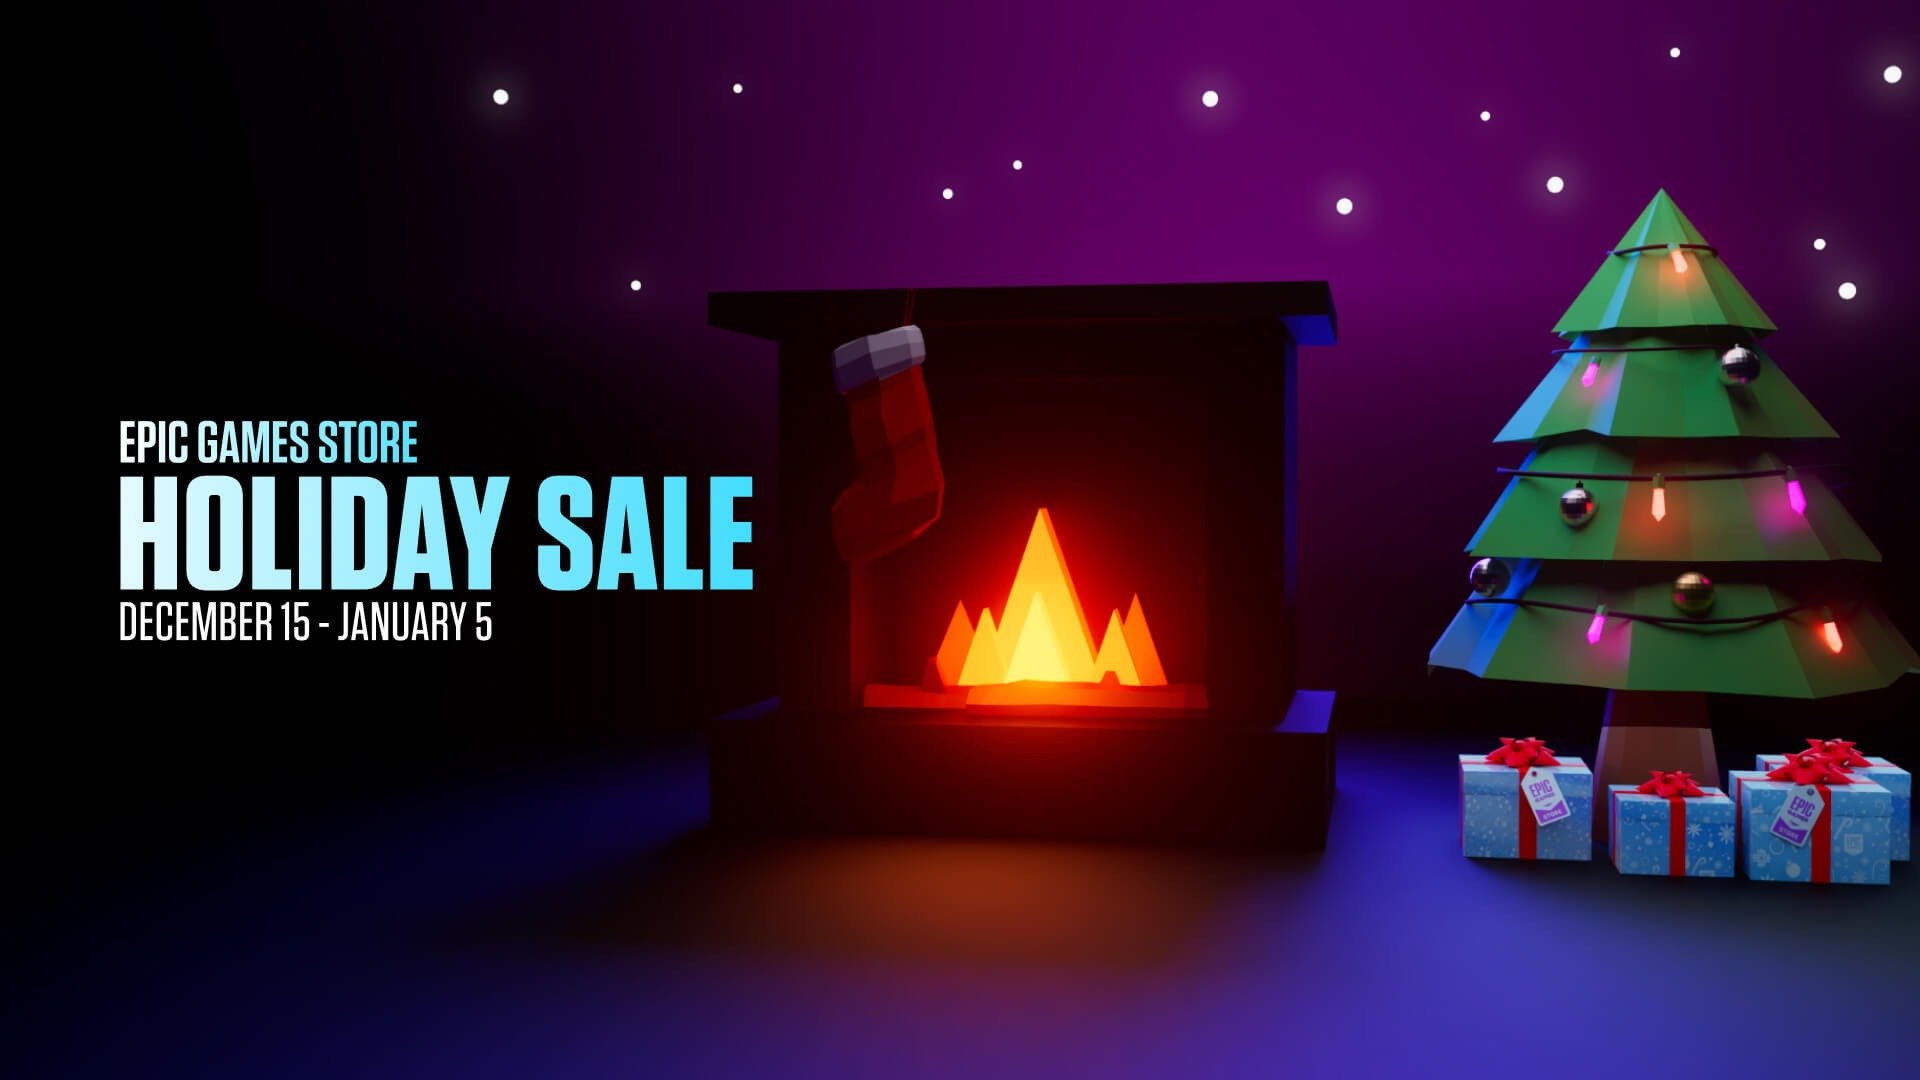 All Epic Games Store free games and best deals during the Holiday Sale